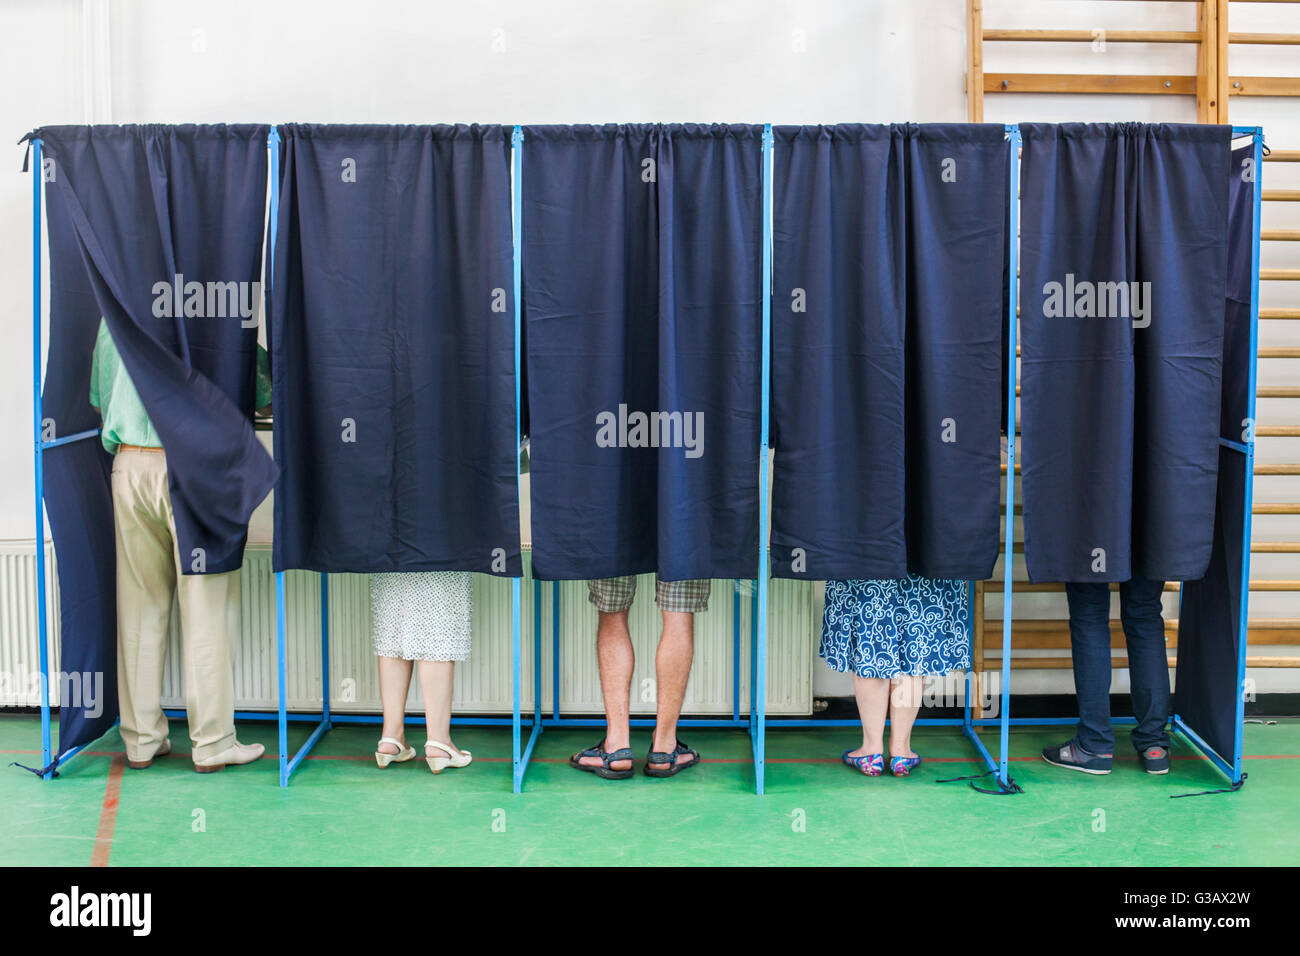 Color image of some people voting in some polling booths at a voting station. Stock Photo